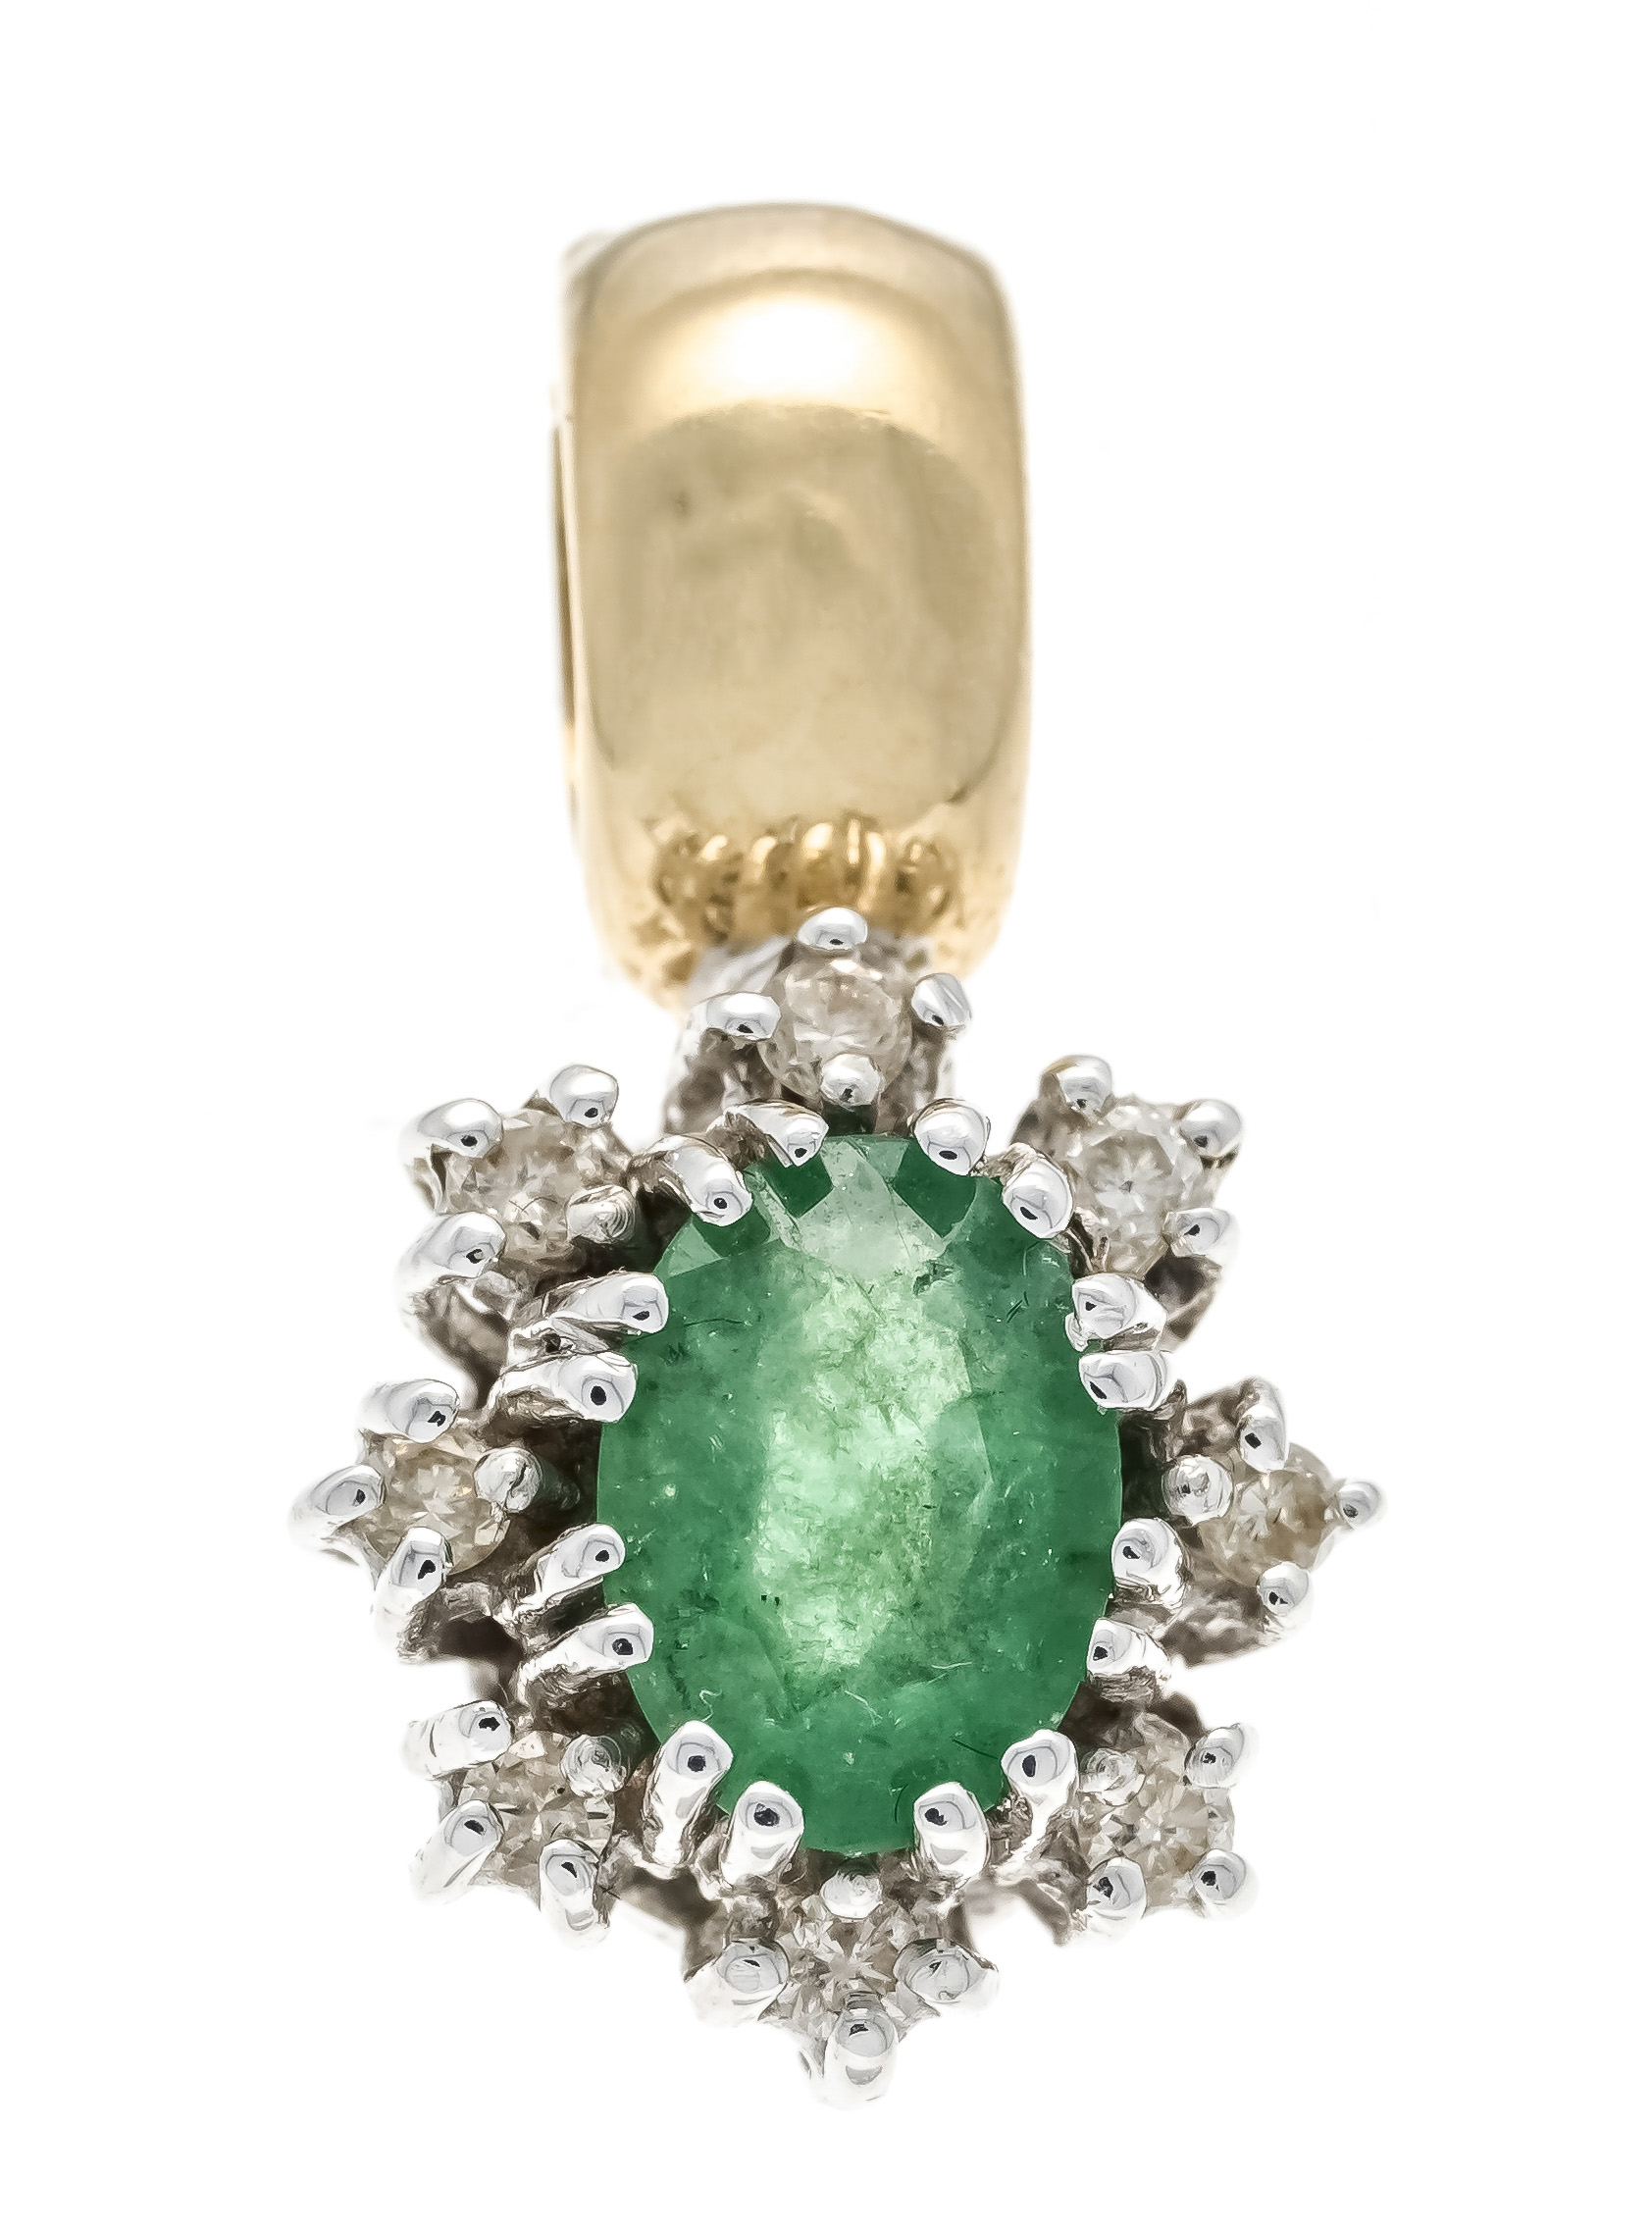 Emerald-brilliant clip pendant GG/WG 585/000 with an oval faceted emerald 6.1 x 4.8 mm green,